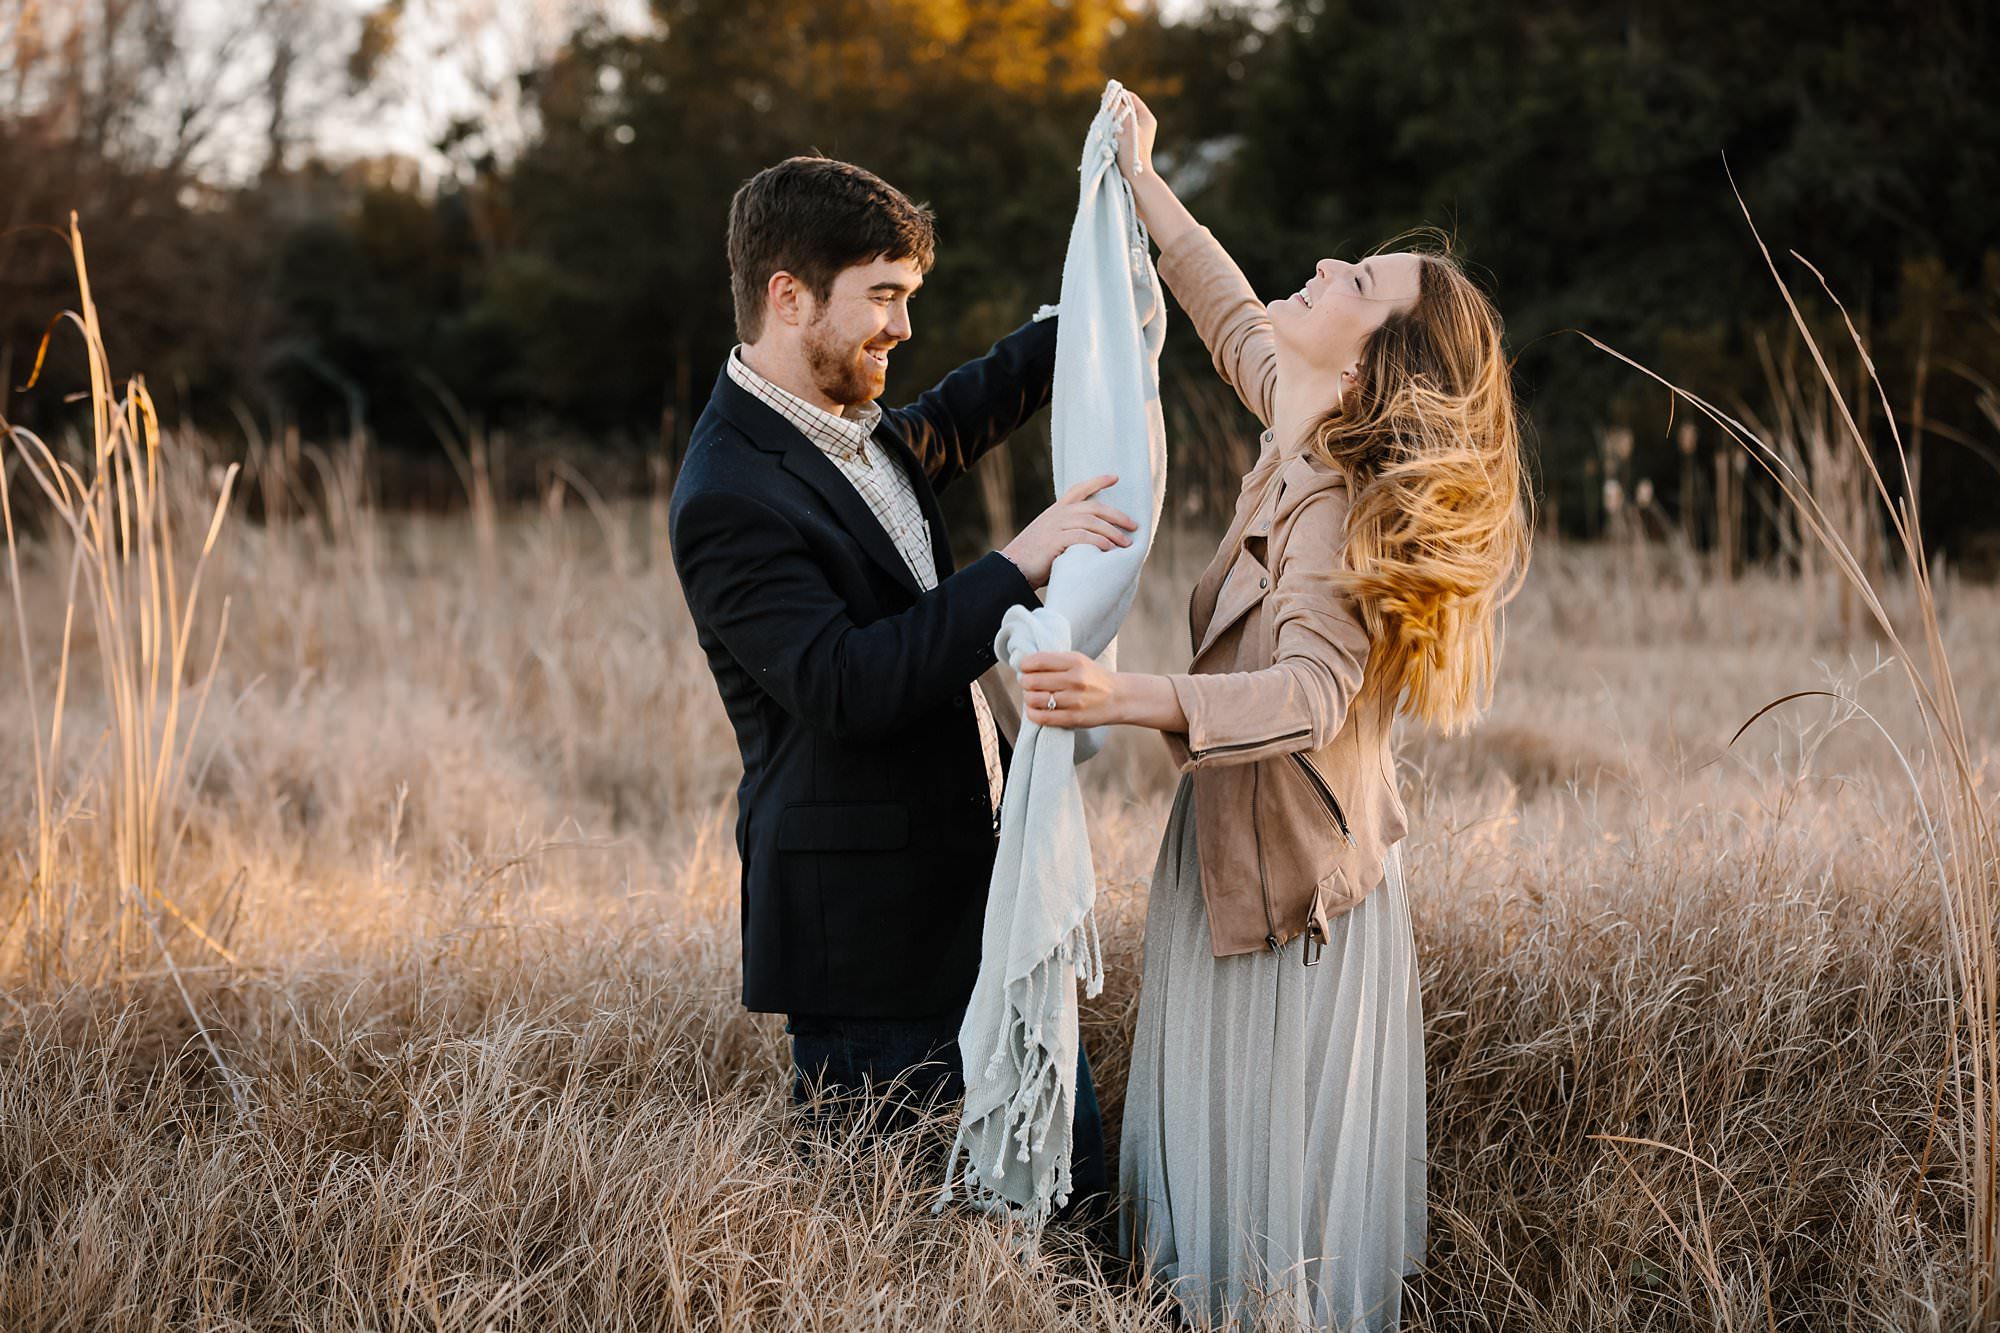 Megan and Turner laughing trying to unfurl a light blue blanket while in a field of tall dry grass